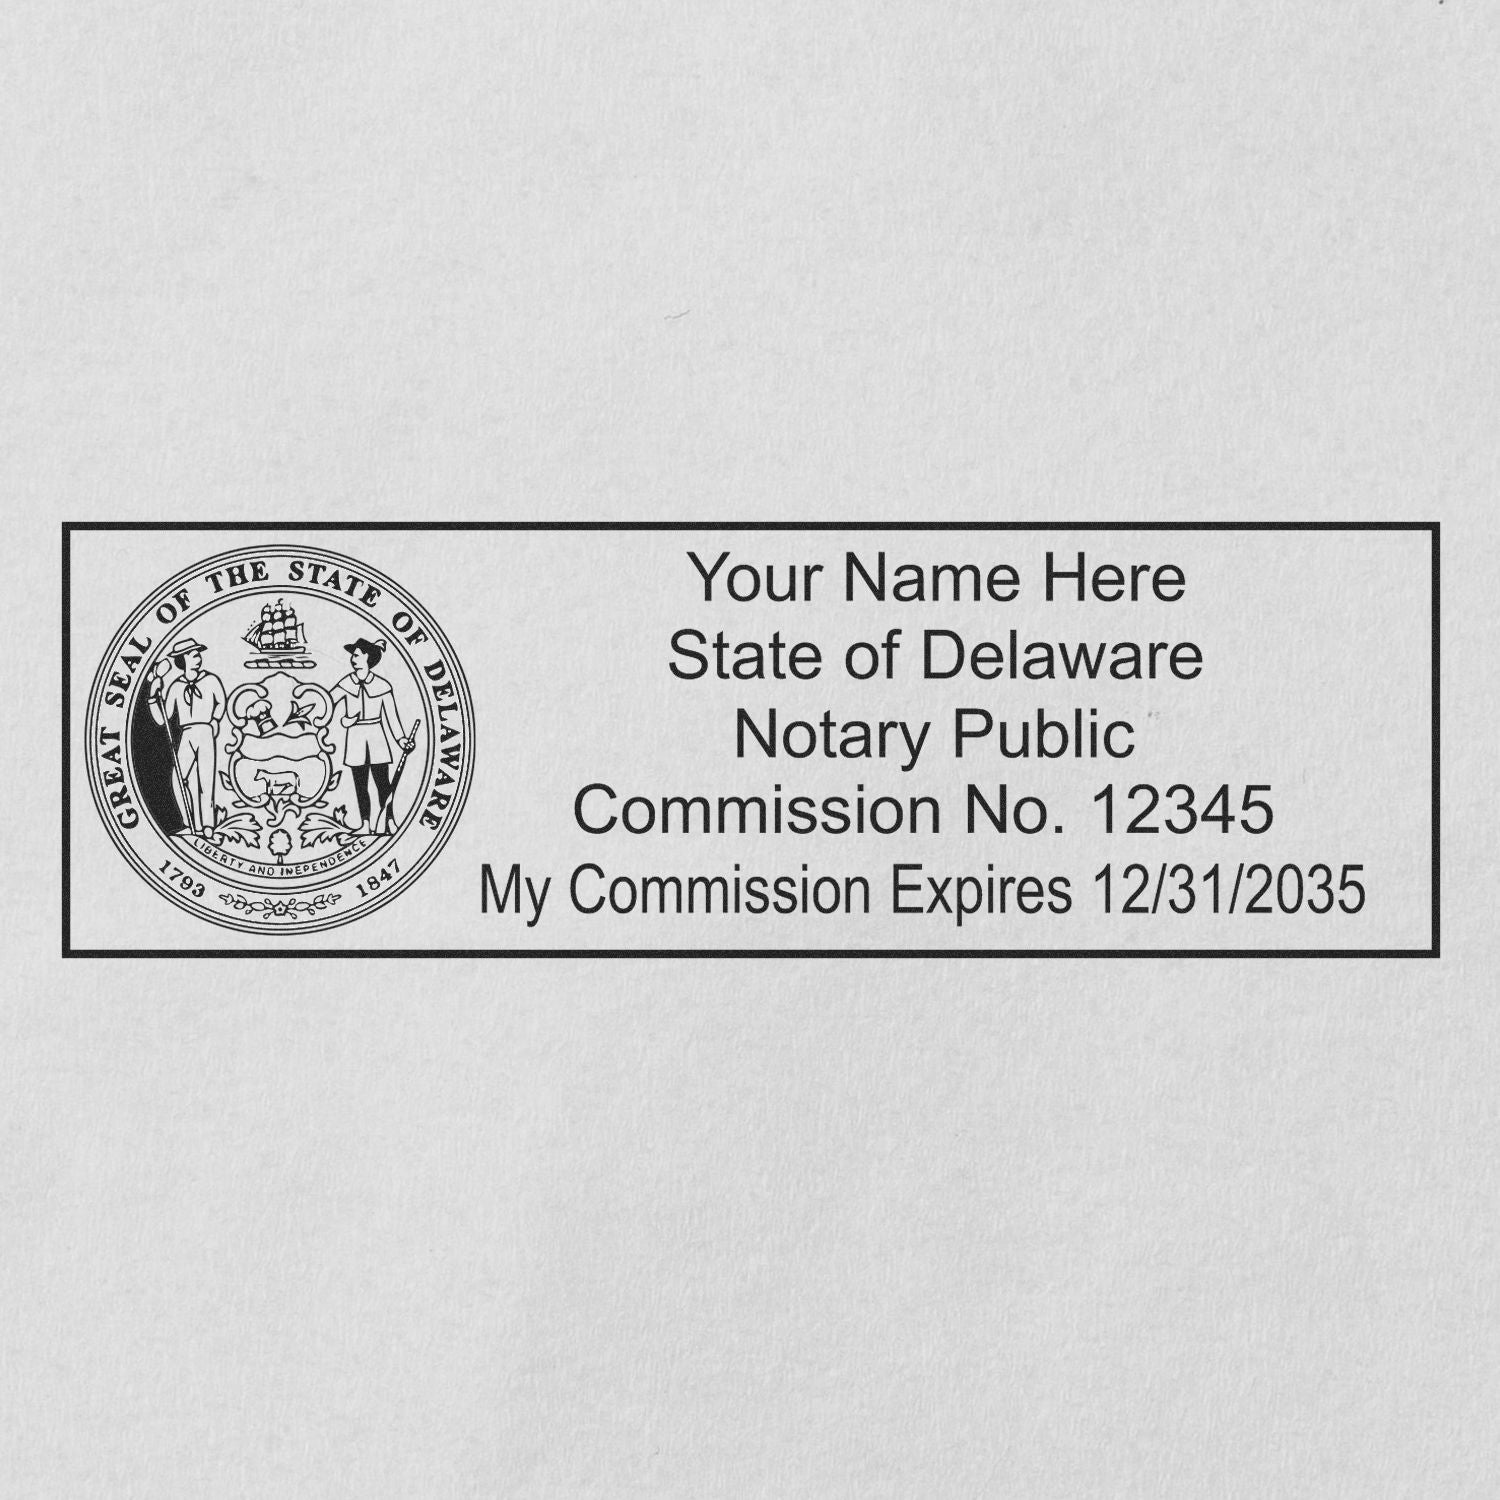 A photograph of the Heavy-Duty Delaware Rectangular Notary Stamp stamp impression reveals a vivid, professional image of the on paper.